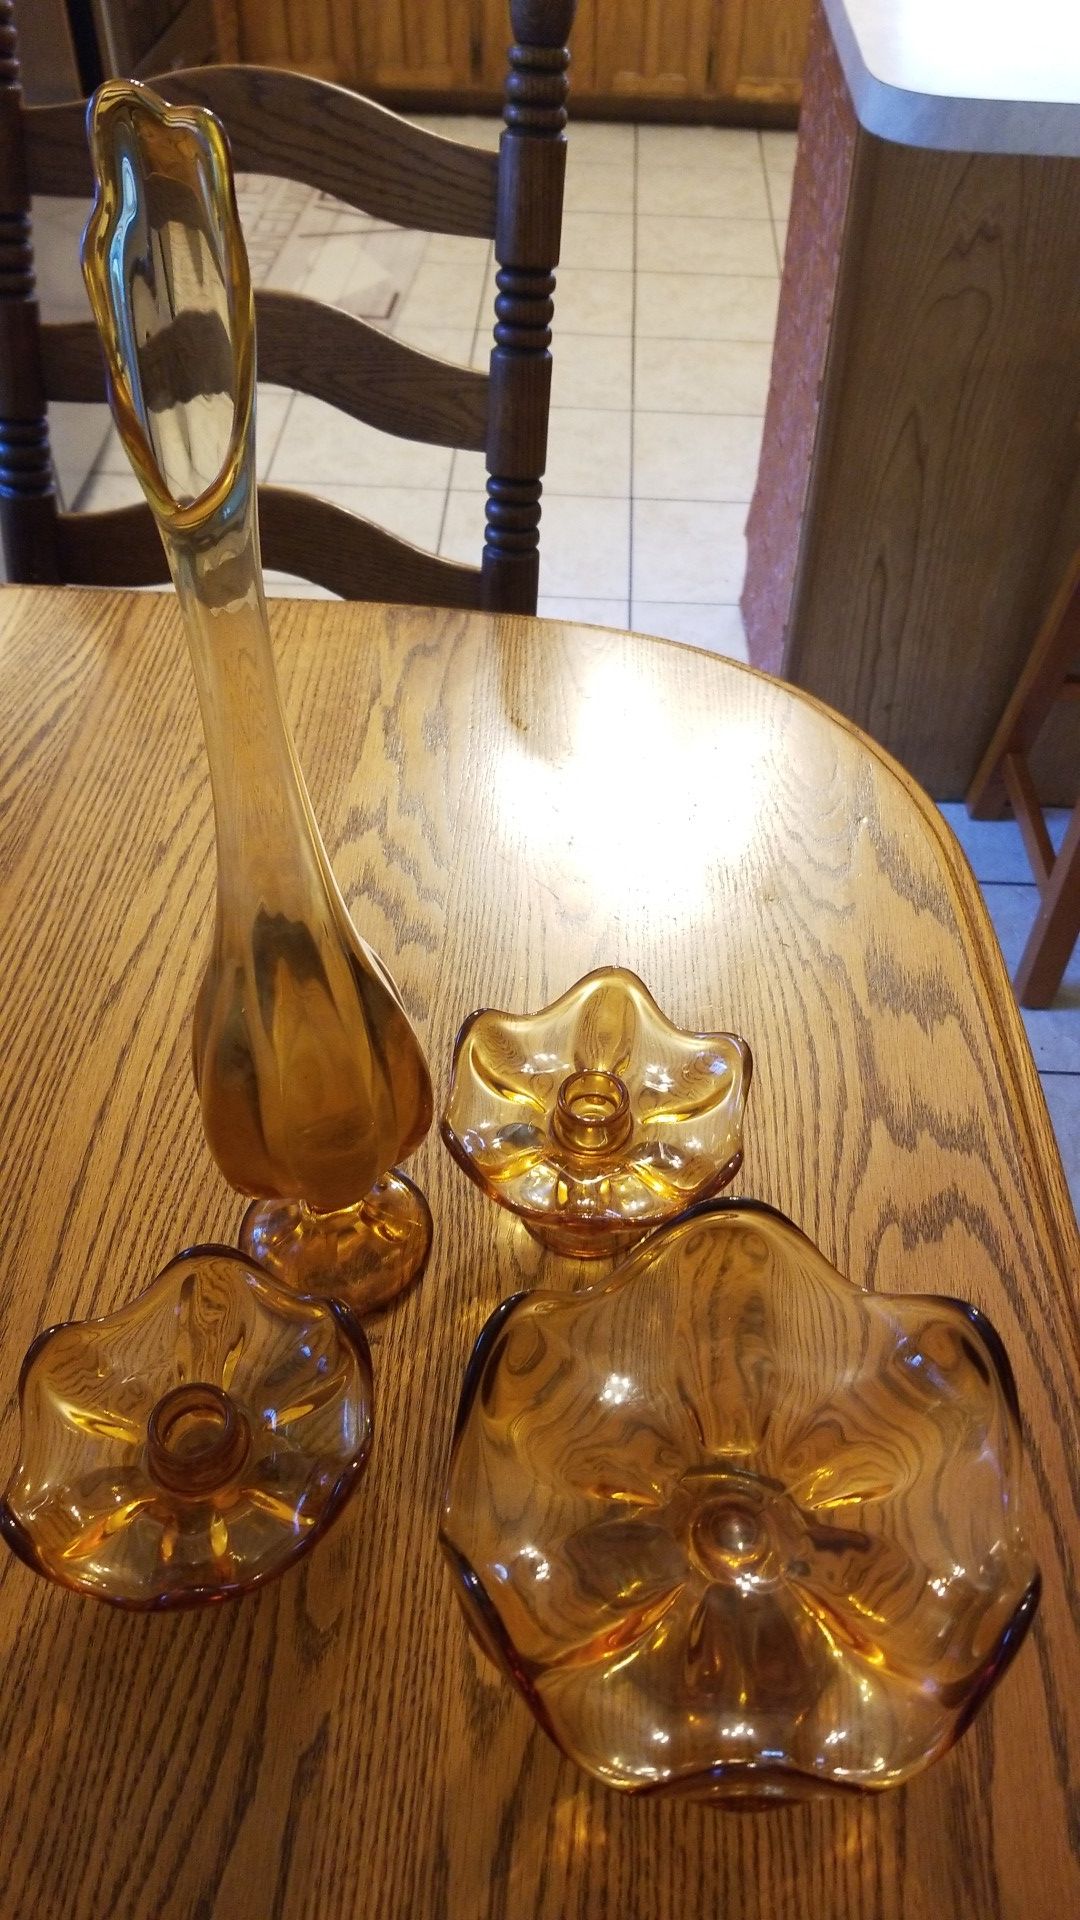 Vintage vase and candle holders